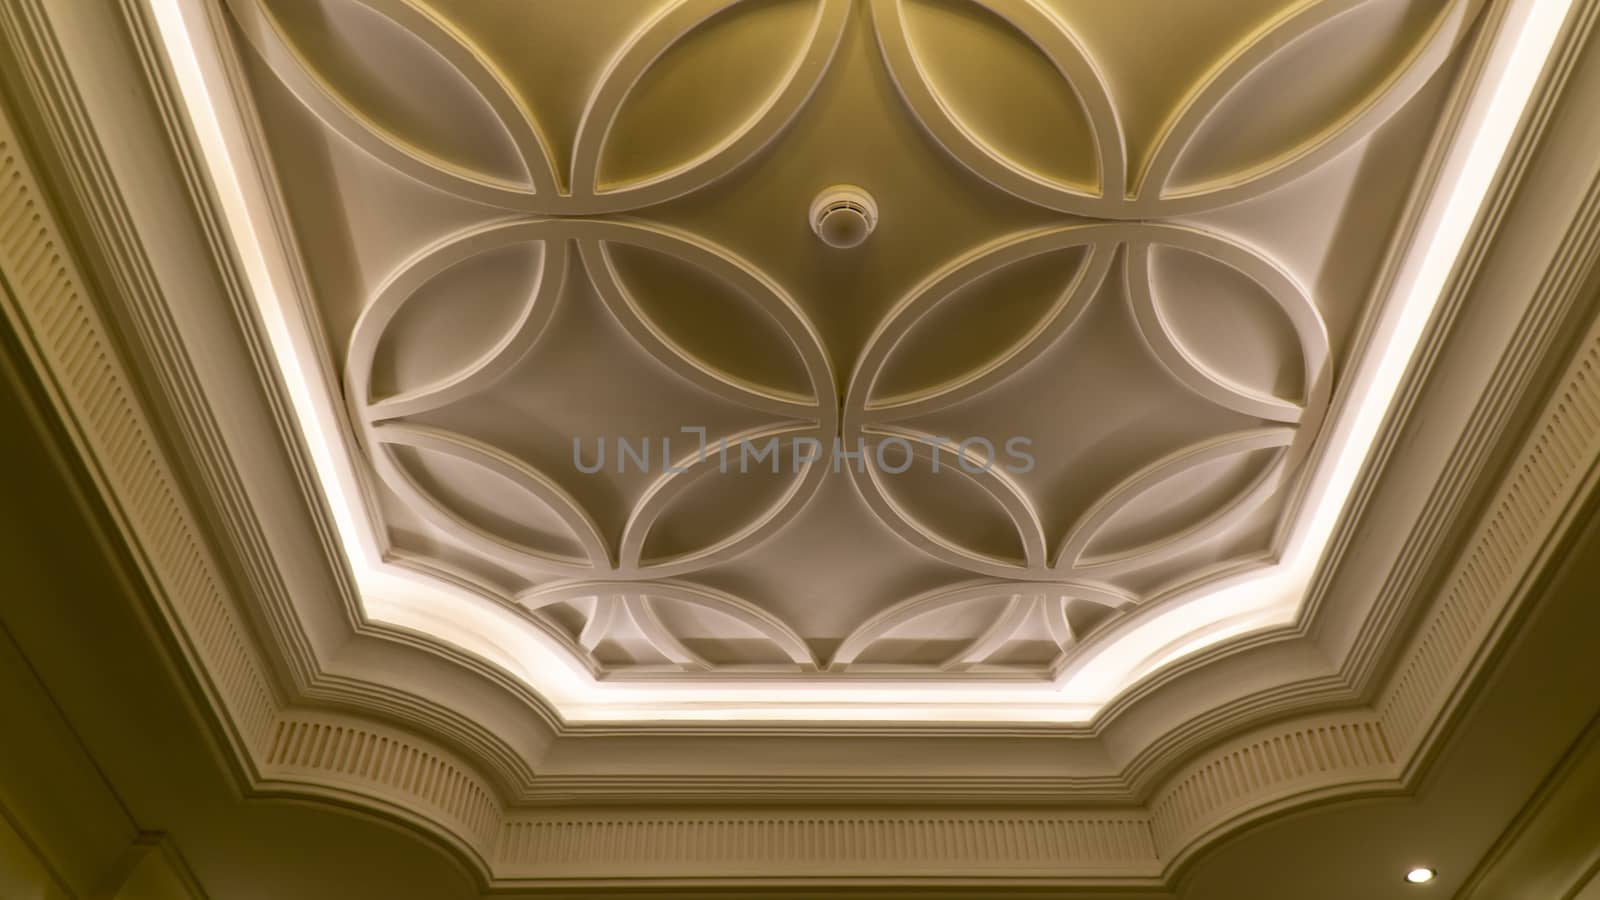 Ceiling design with lighting decorations by sonandonures